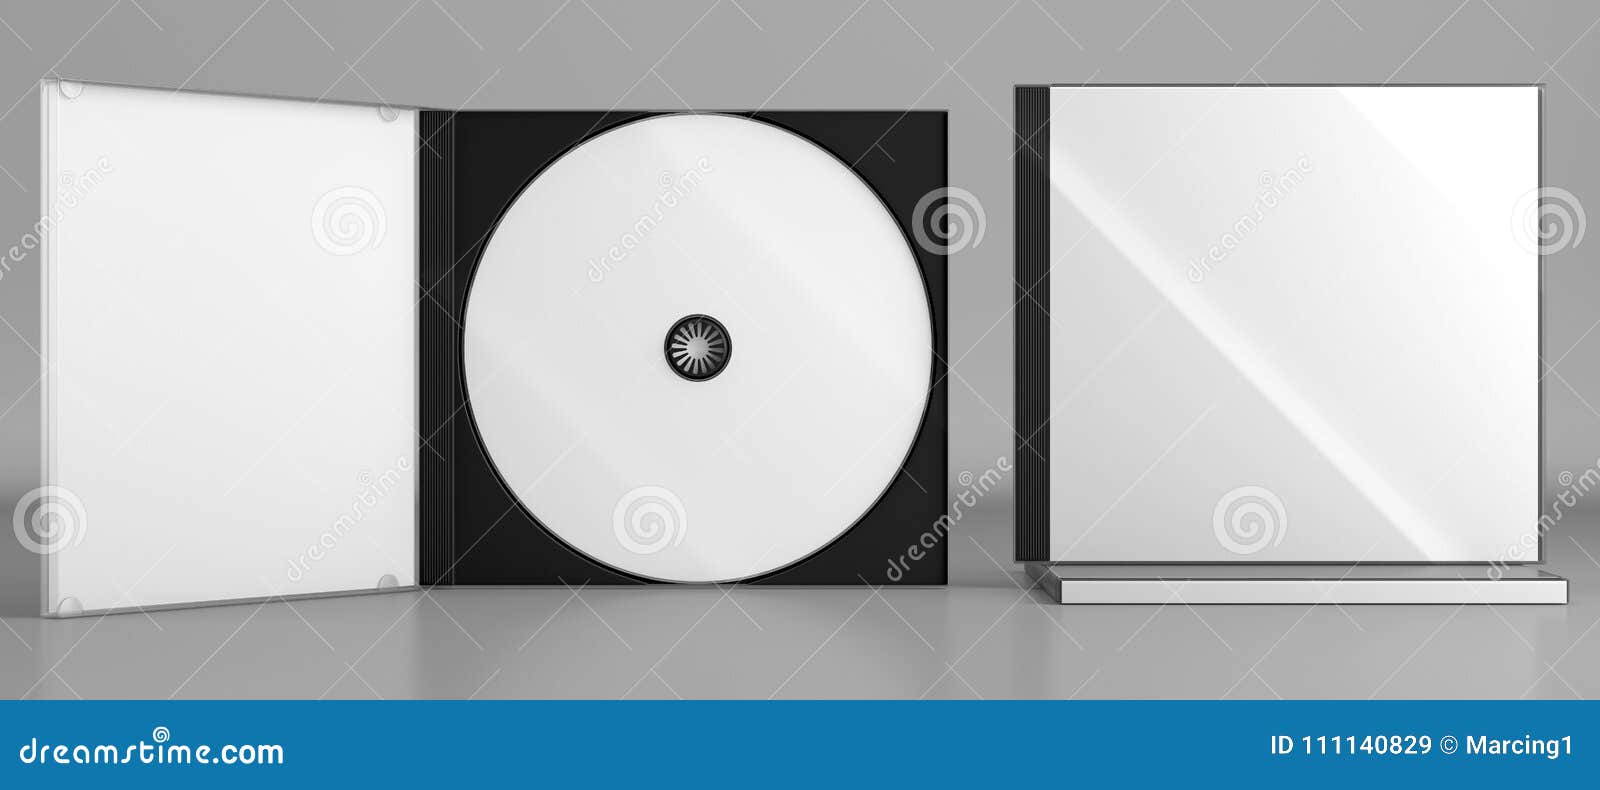 Download CD DVD Disc Plastic Box Mockup. Front View. Stock ...